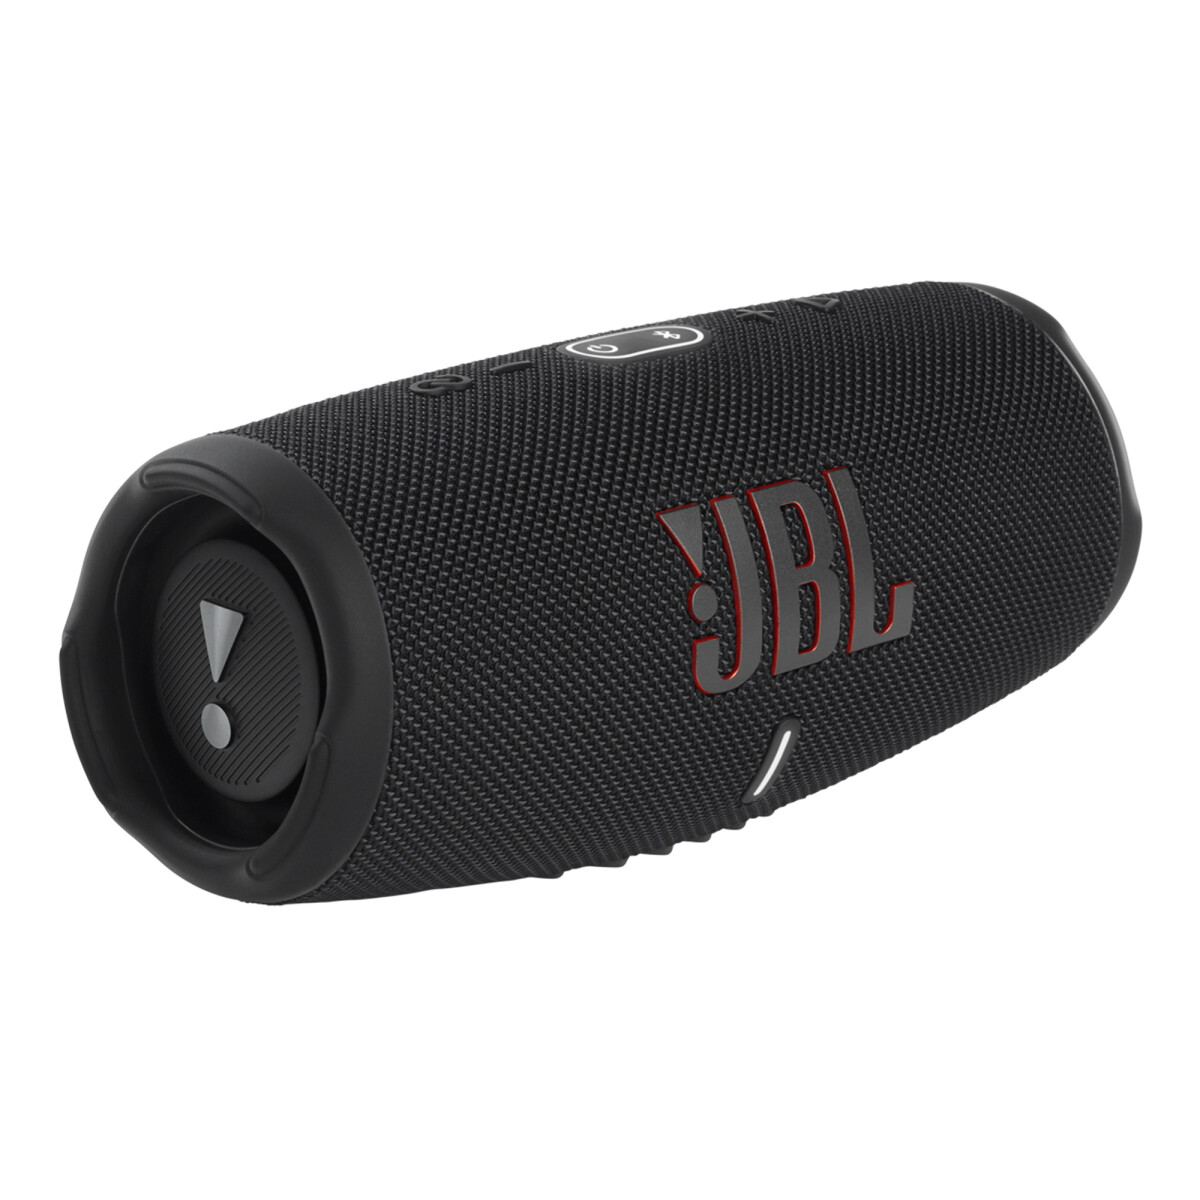 Jbl - Parlante Inalámbrico Charge 5 - IP67. Bluetooth. 30W - 001 